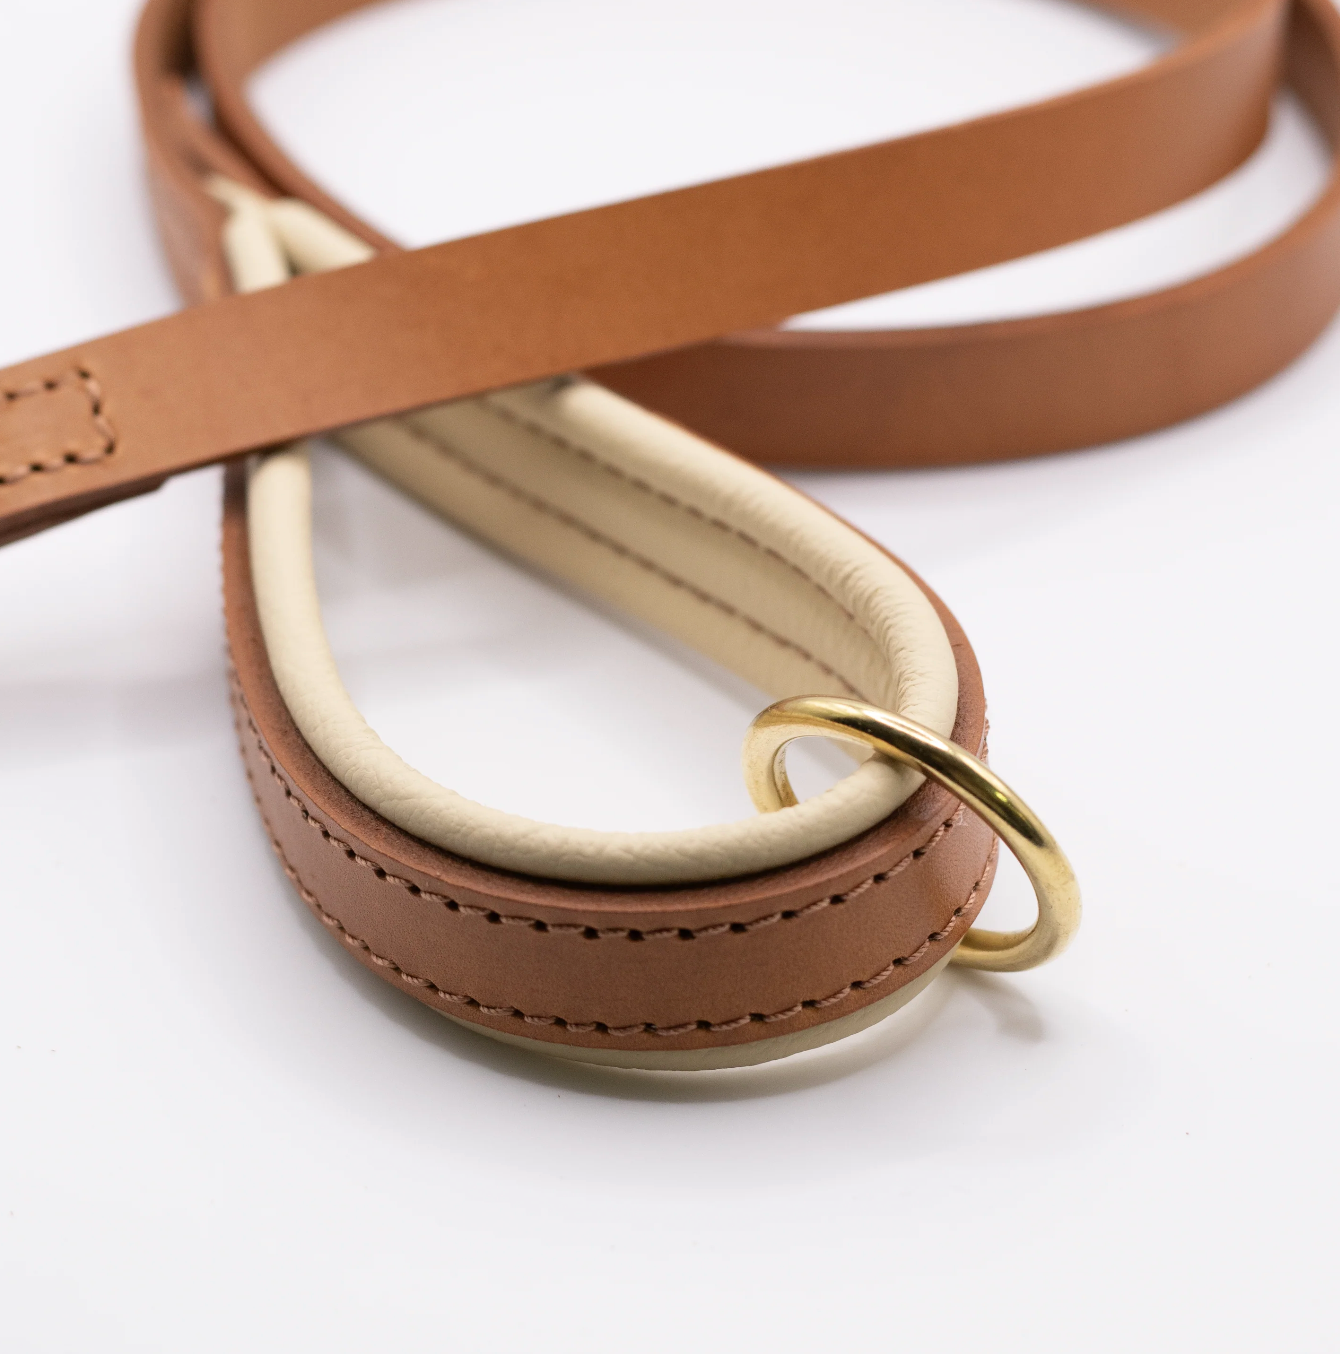 Padded Leather Dog Lead Tan and Cream